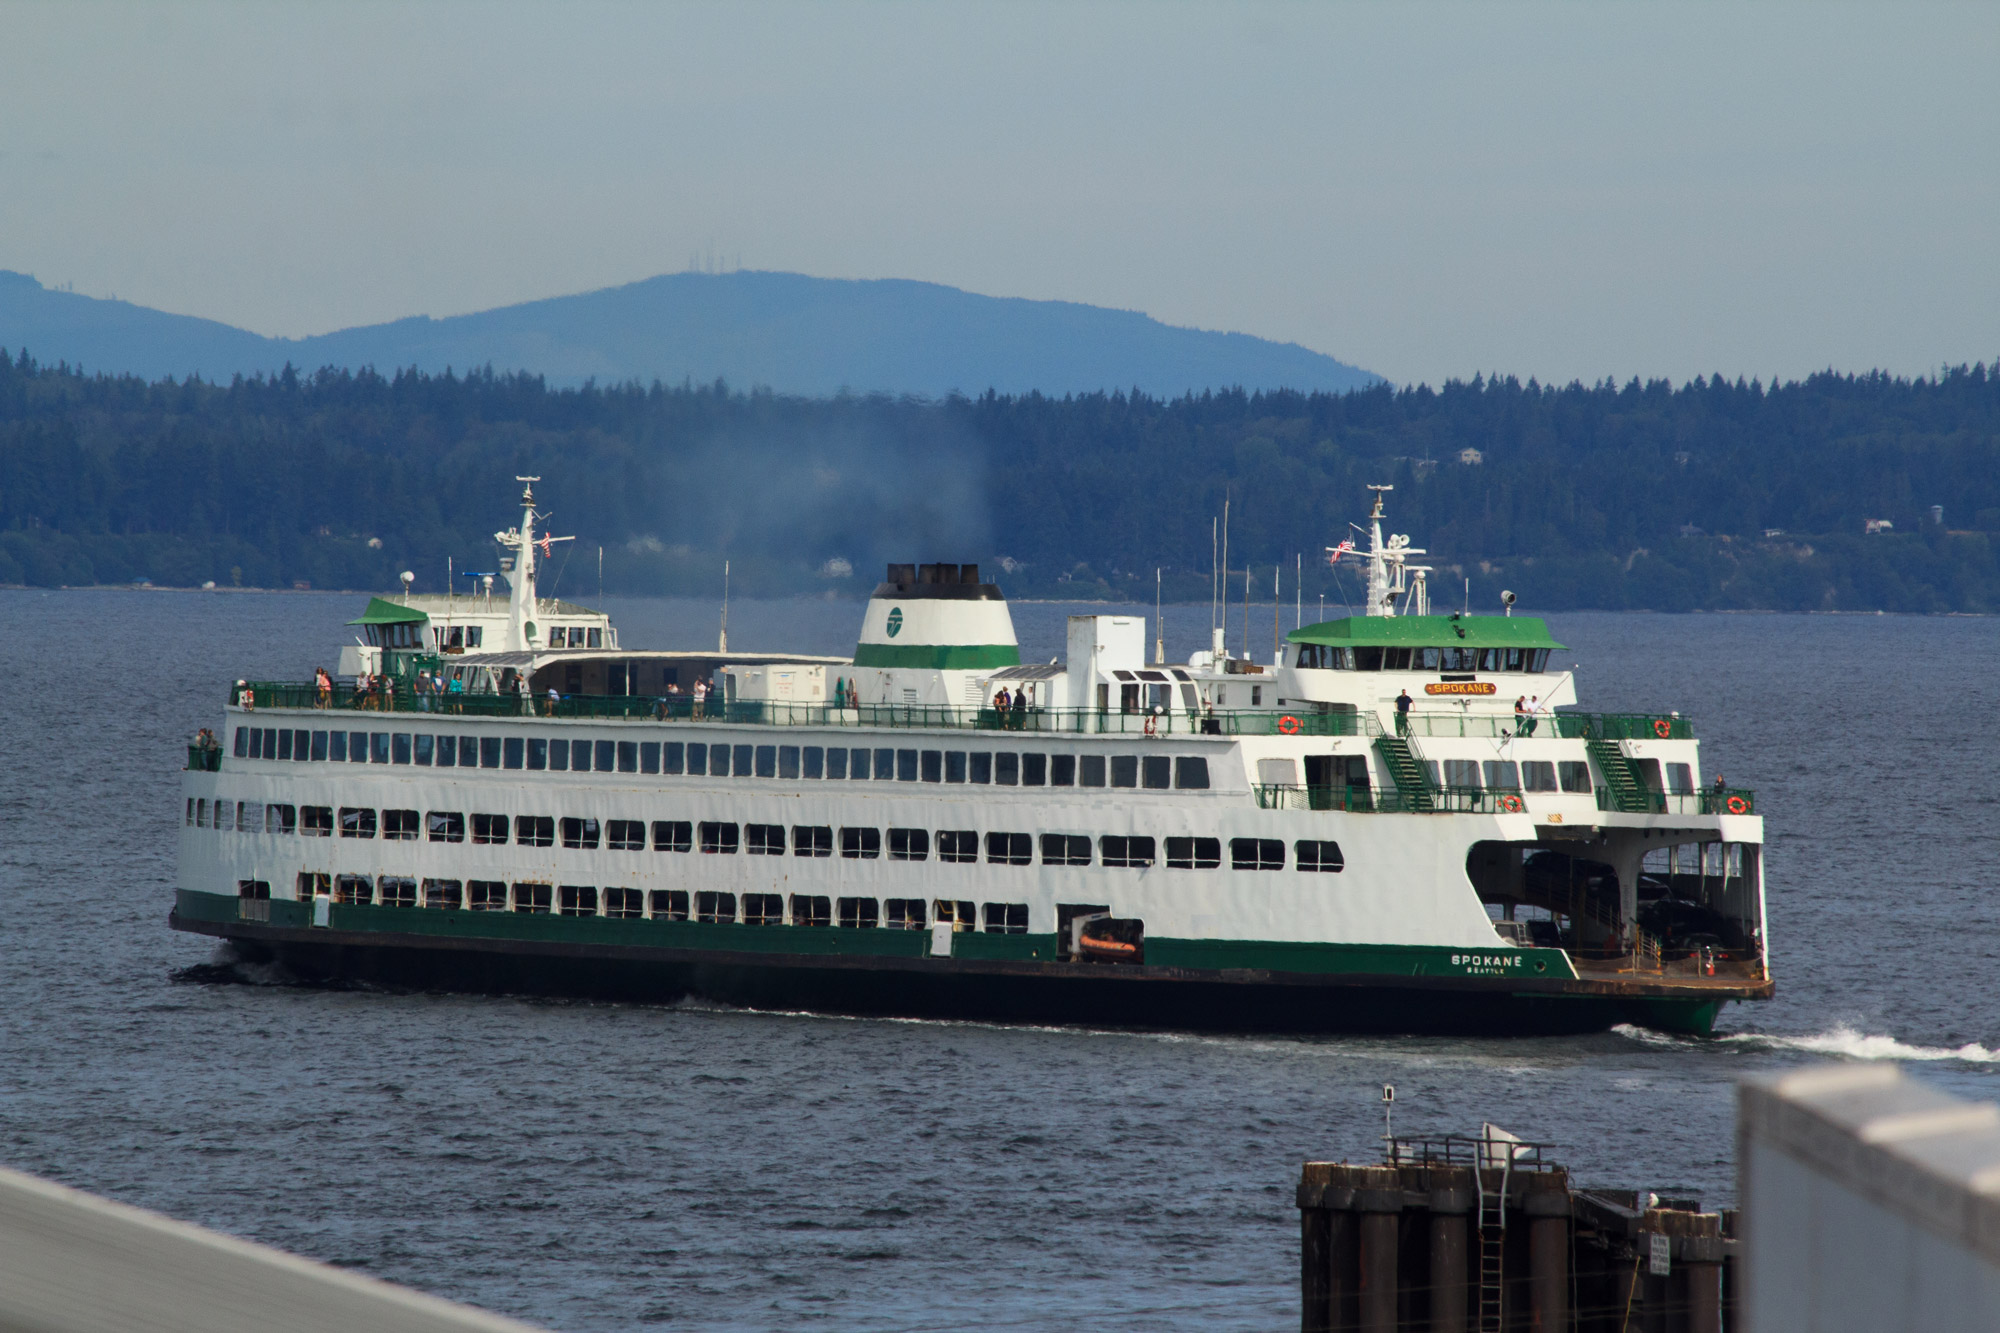 by Jane Harder: Jane Harder Edmonds Ferry from Balcony Sipping Coffee, 2 minutes after Solstice